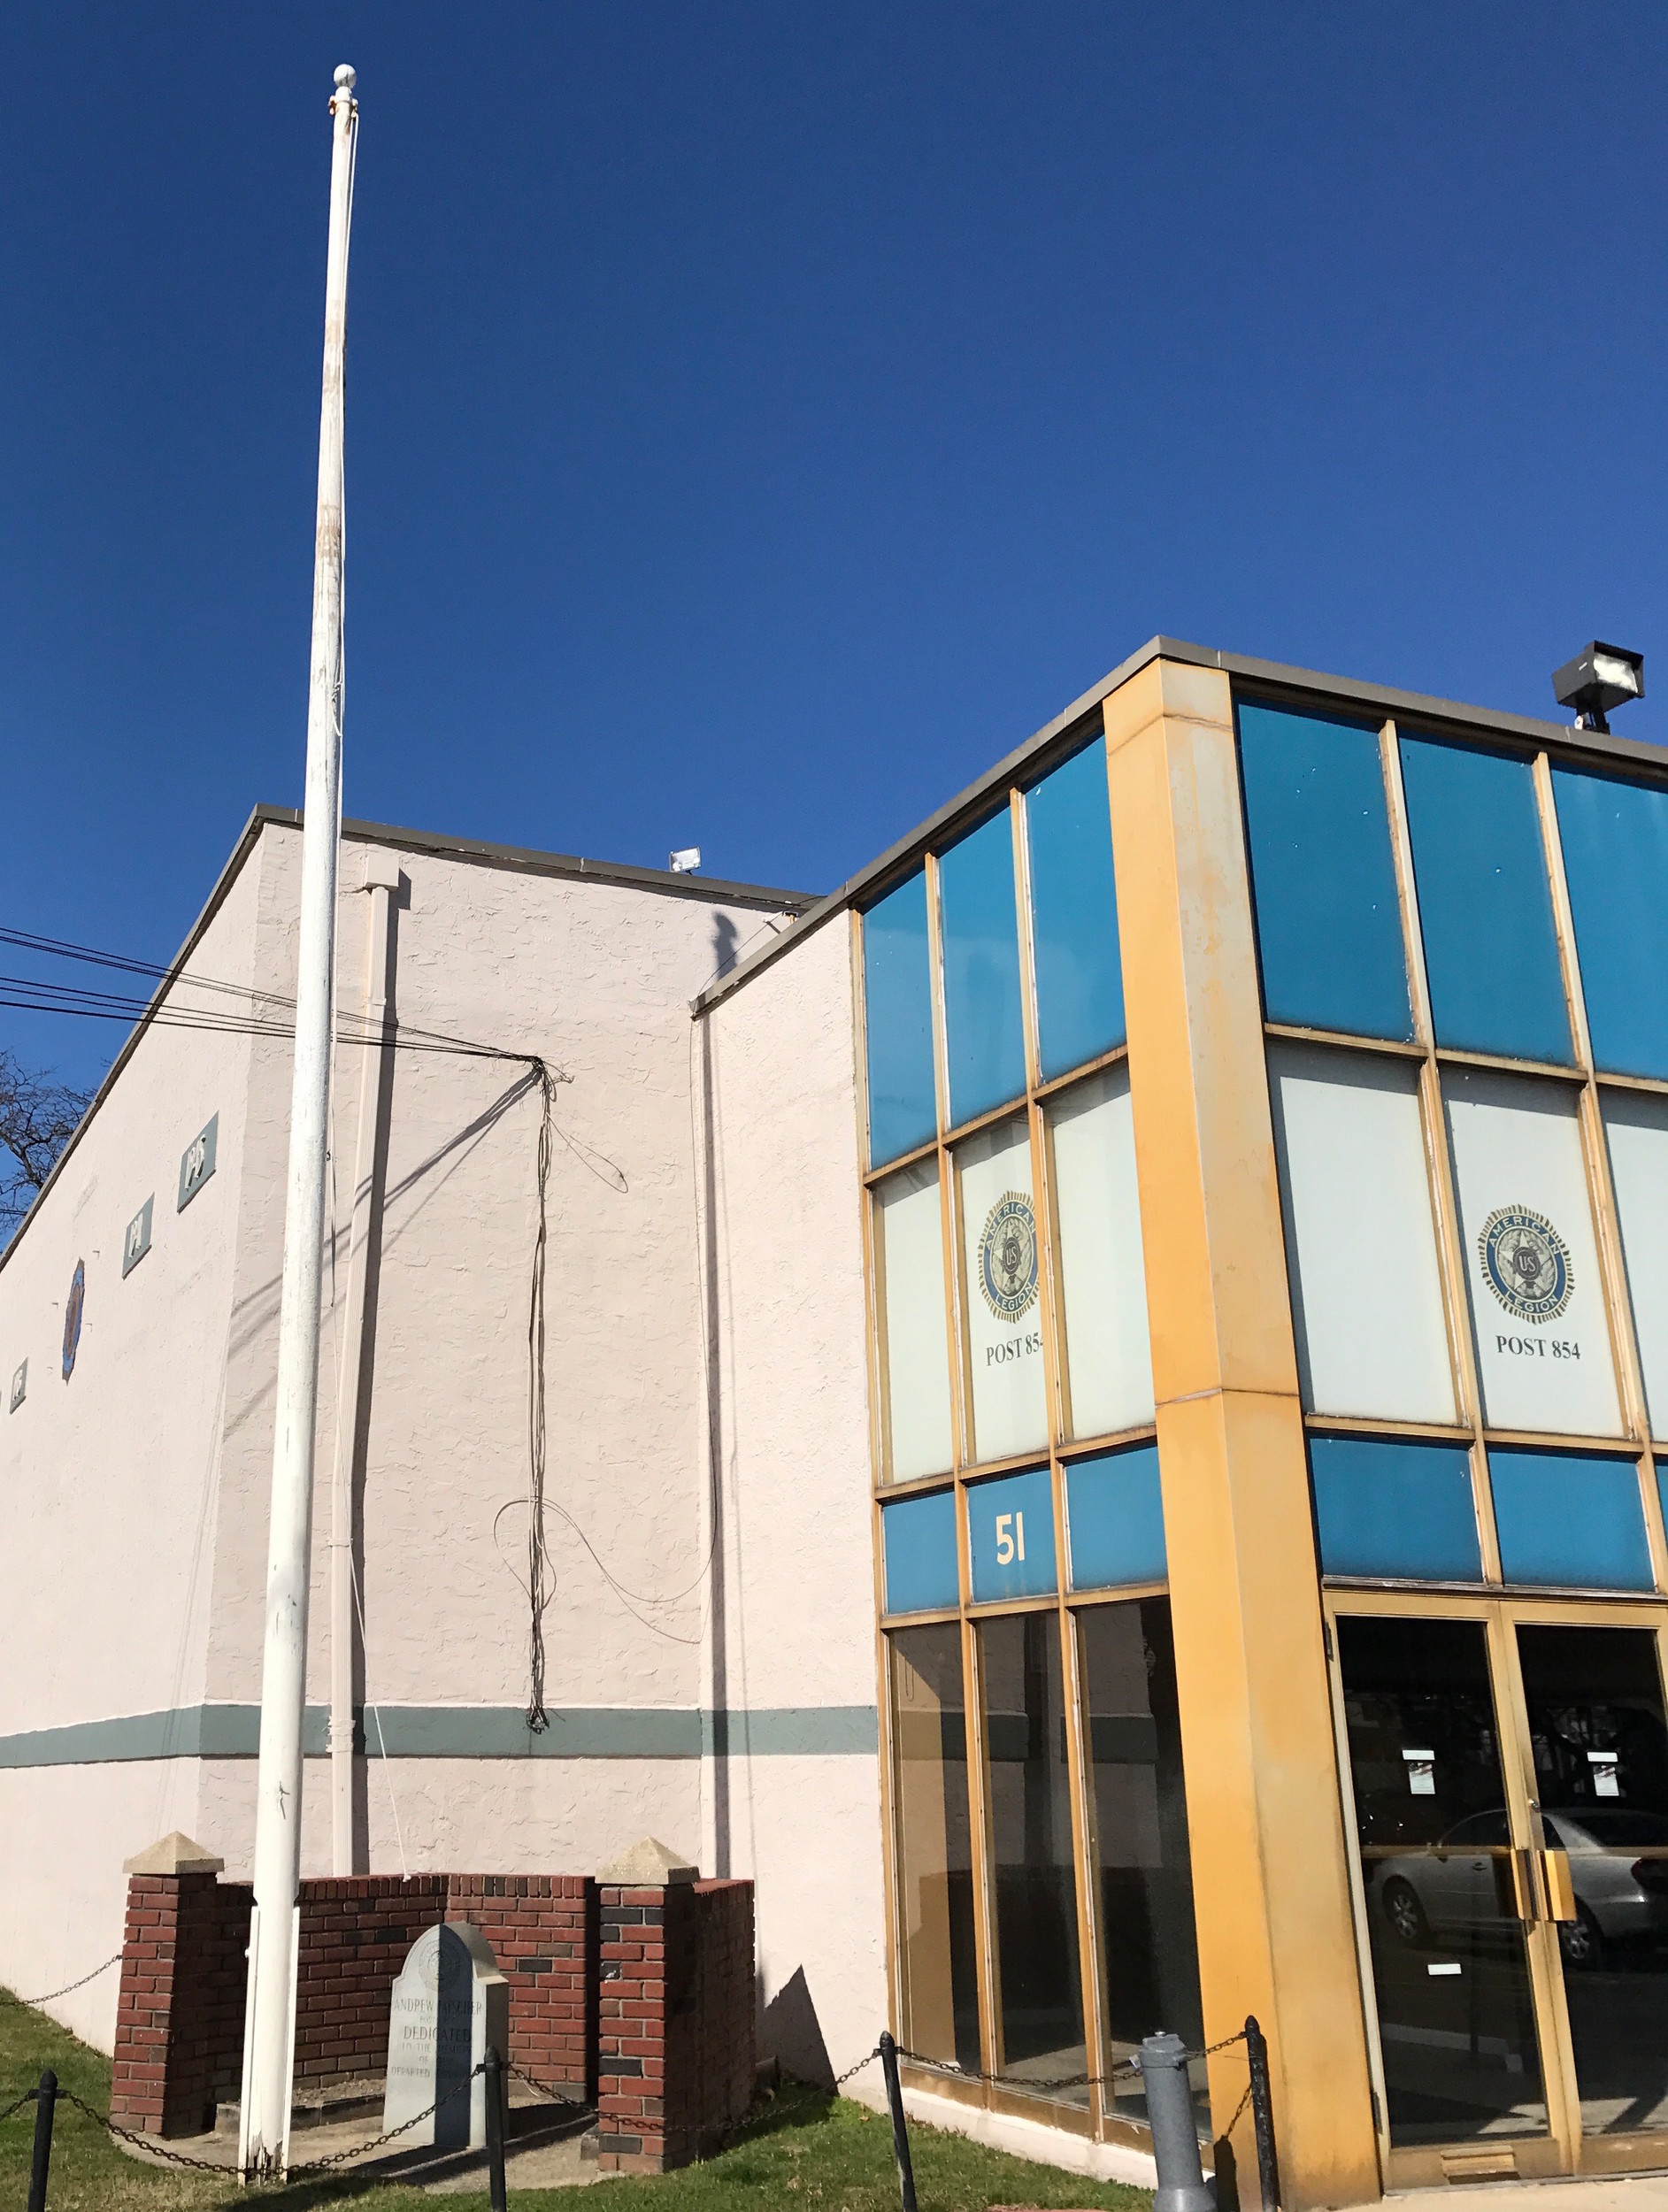 Valley Stream American Legion Post 854, at 51 Roosevelt Ave., had gone about a week without its American flag as of press time.